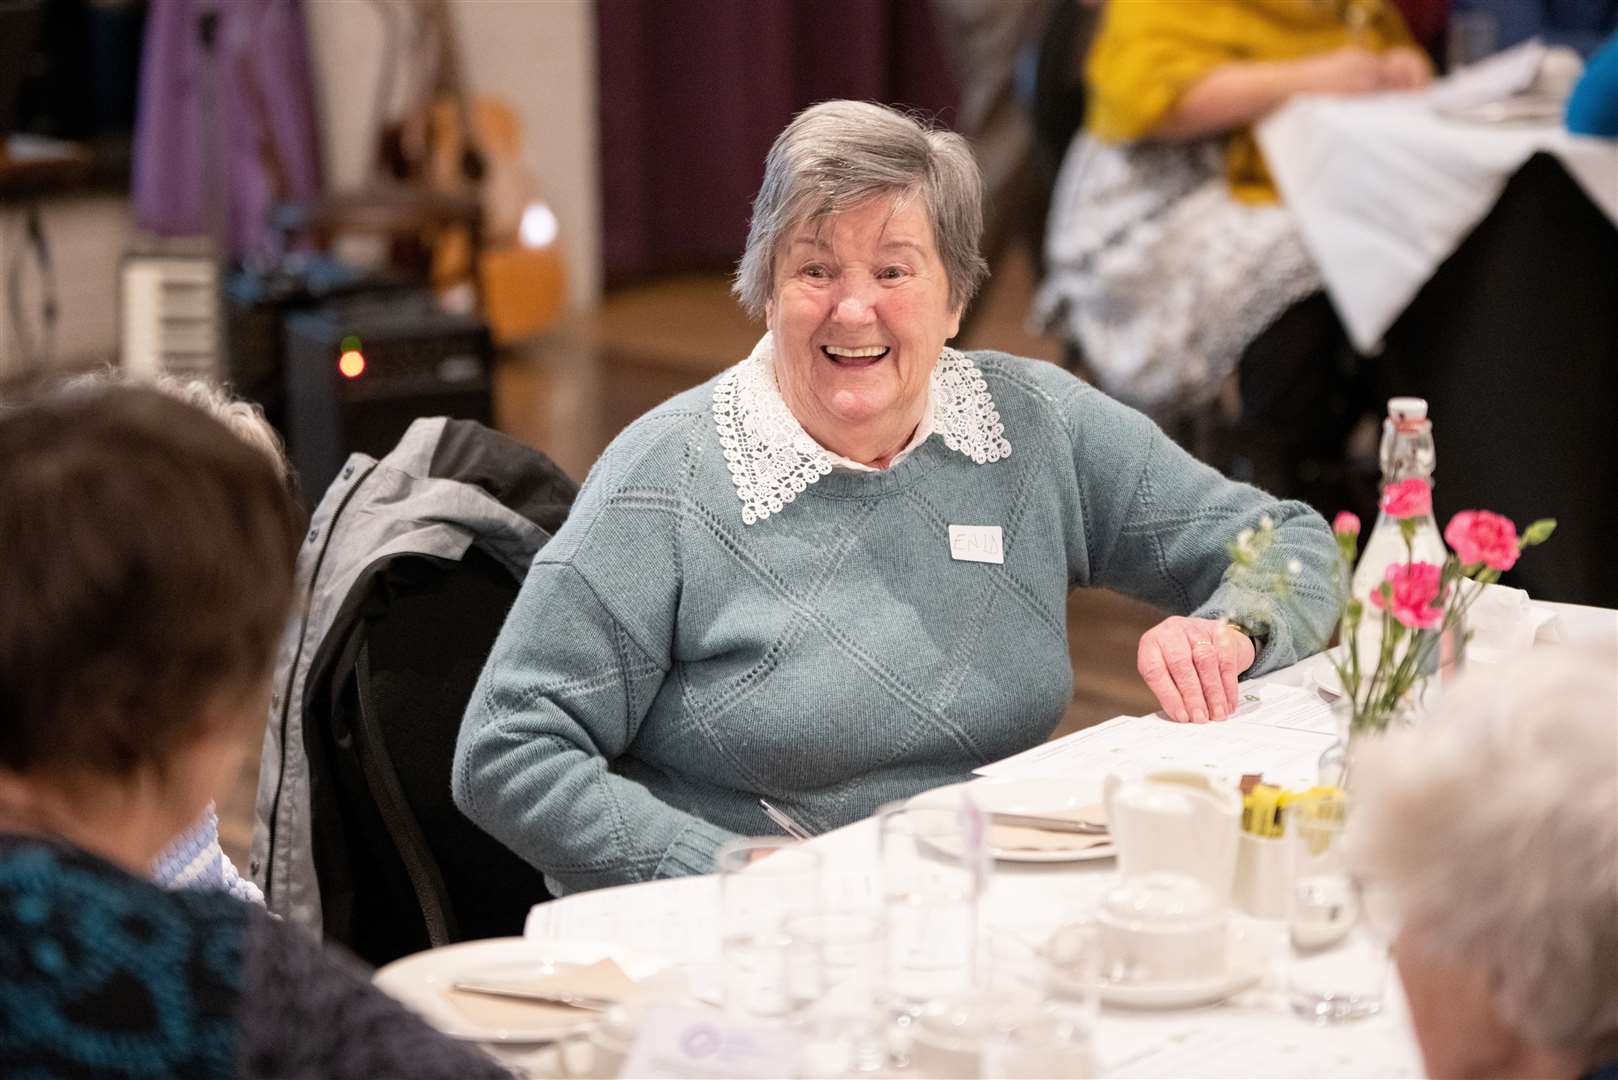 There was lots of fun, laughter and dancing at the event. Picture: Daniel Forsyth.